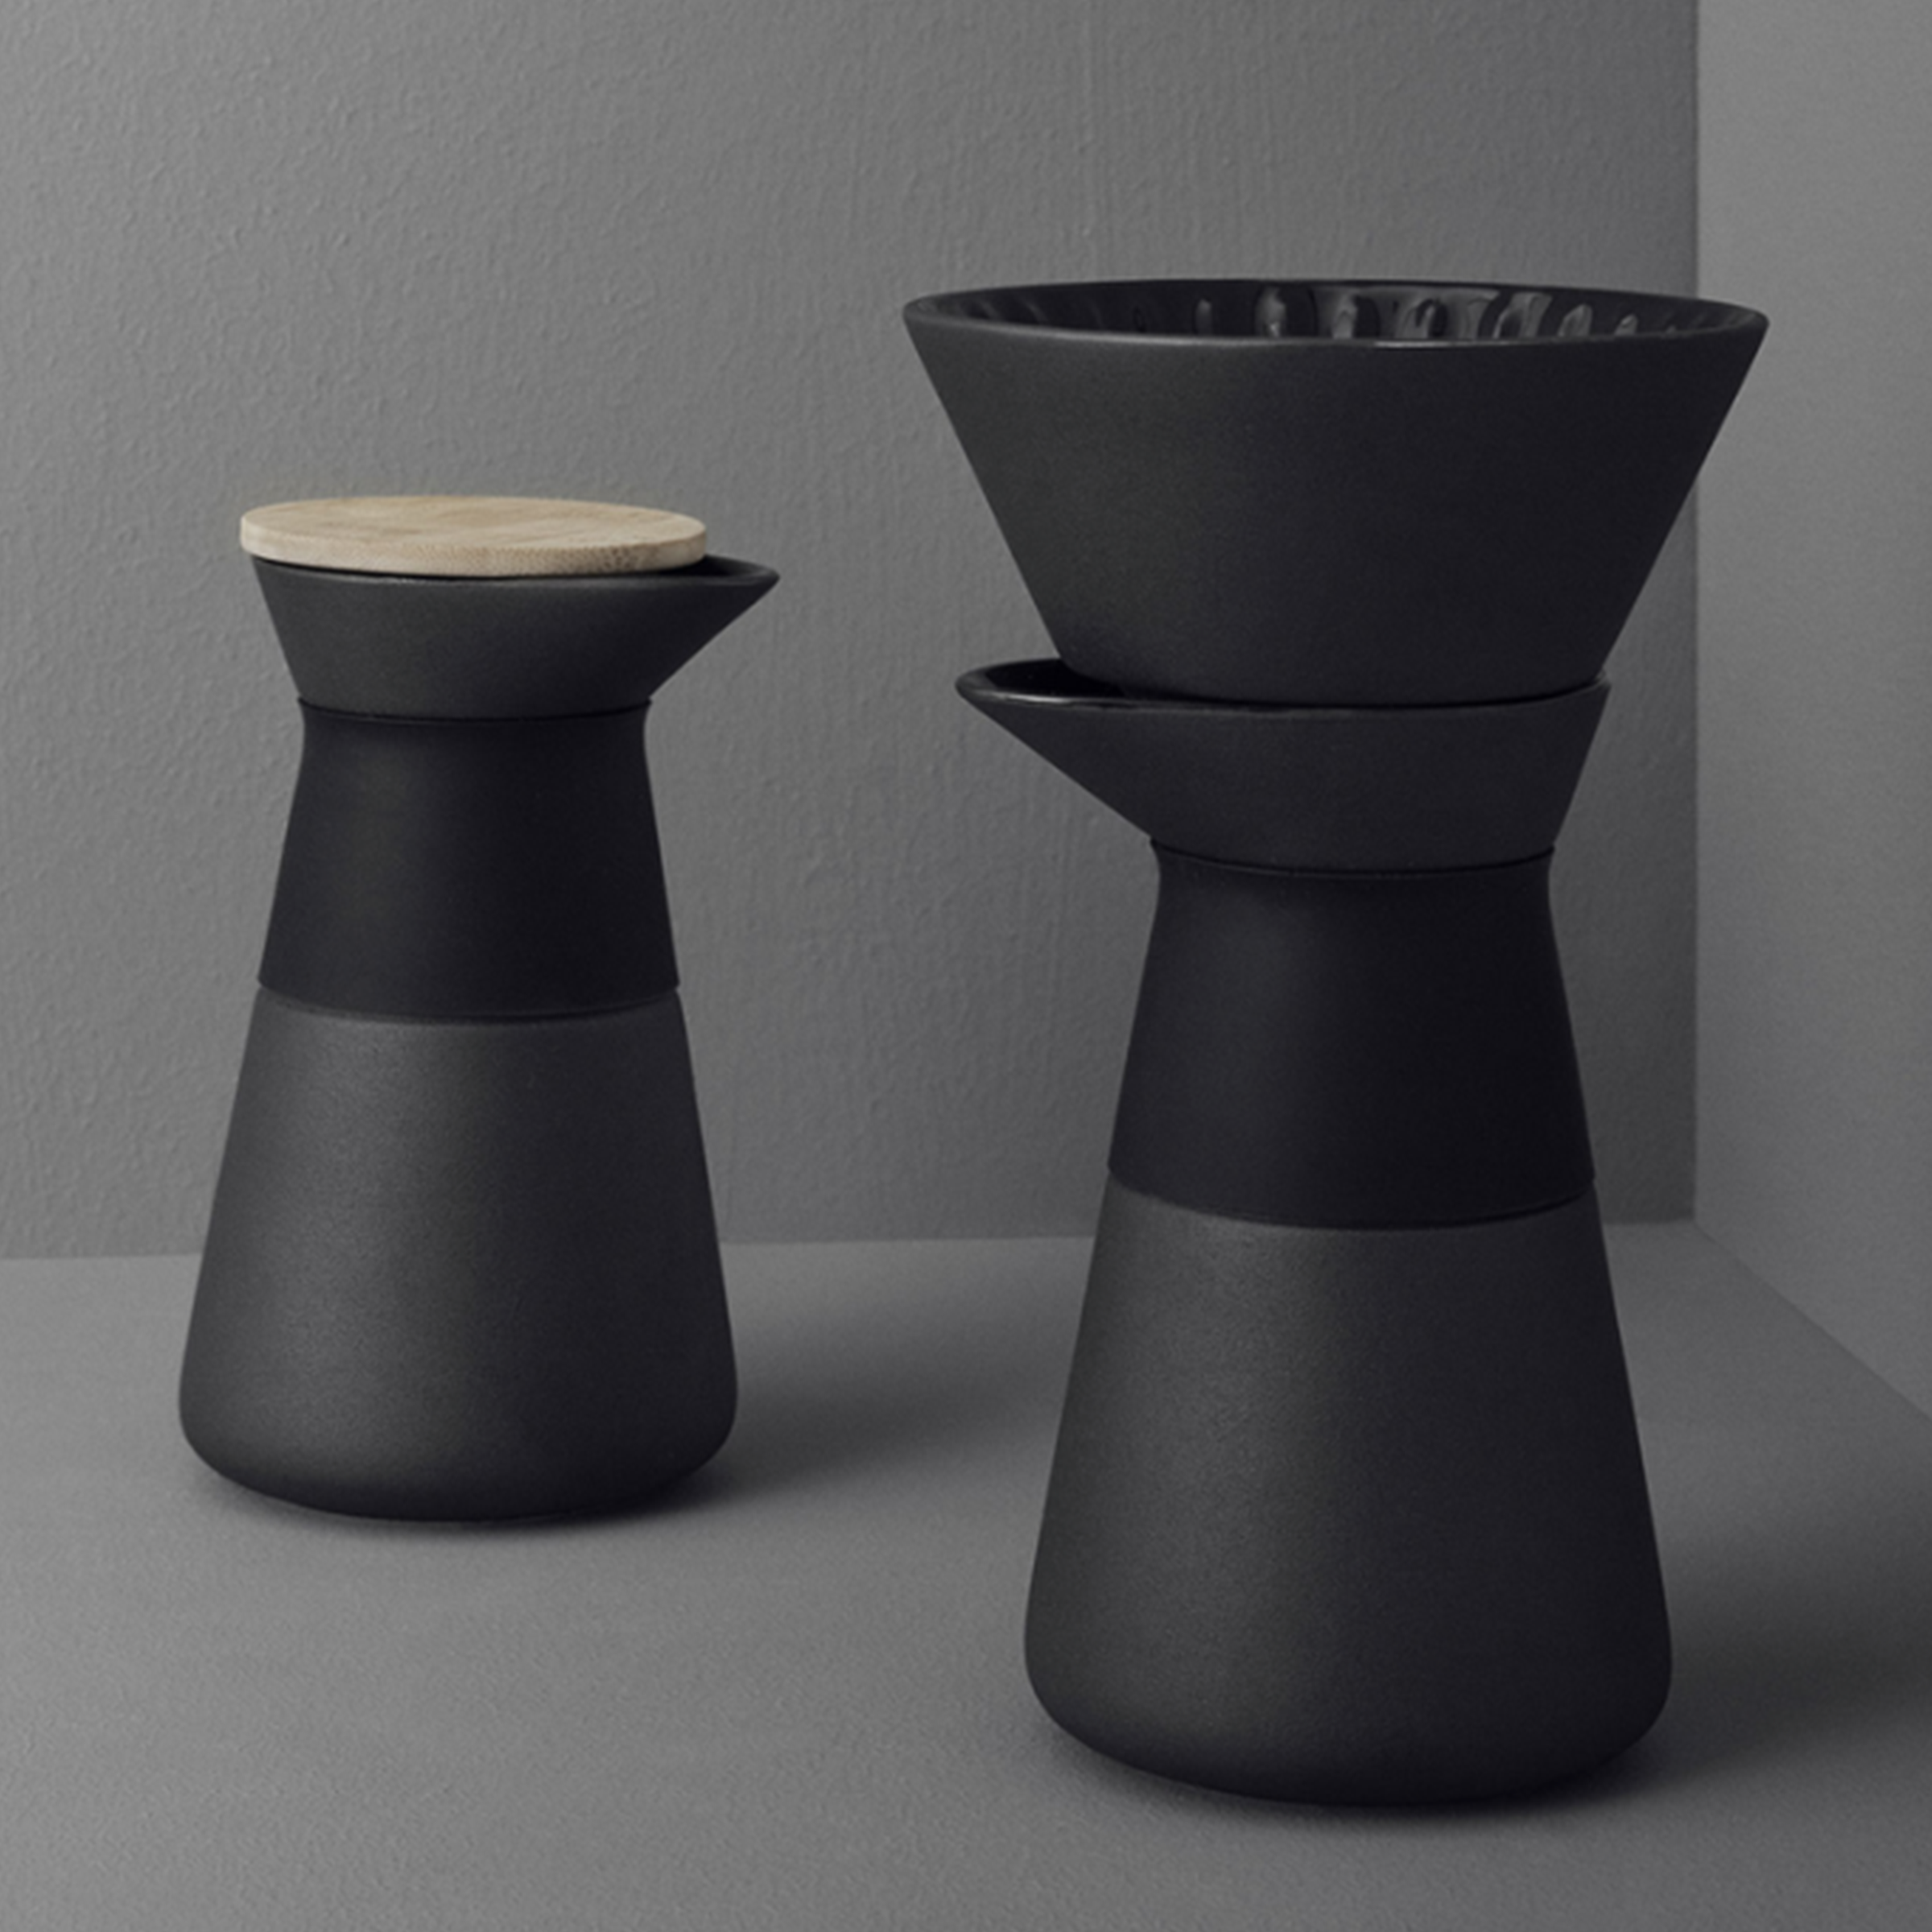 theo coffee maker by francis cayouette for stelton.